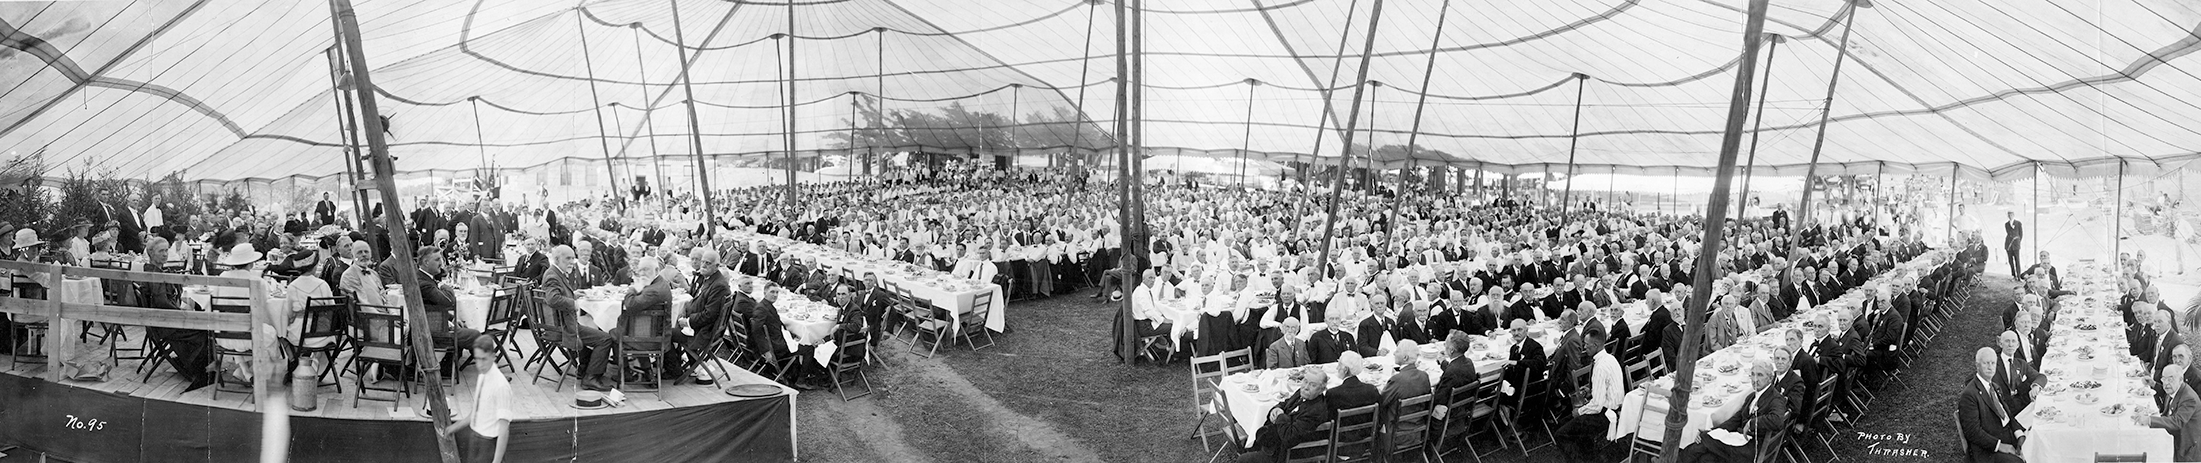 A wide black and white photo of hundreds of people eating under a large pent